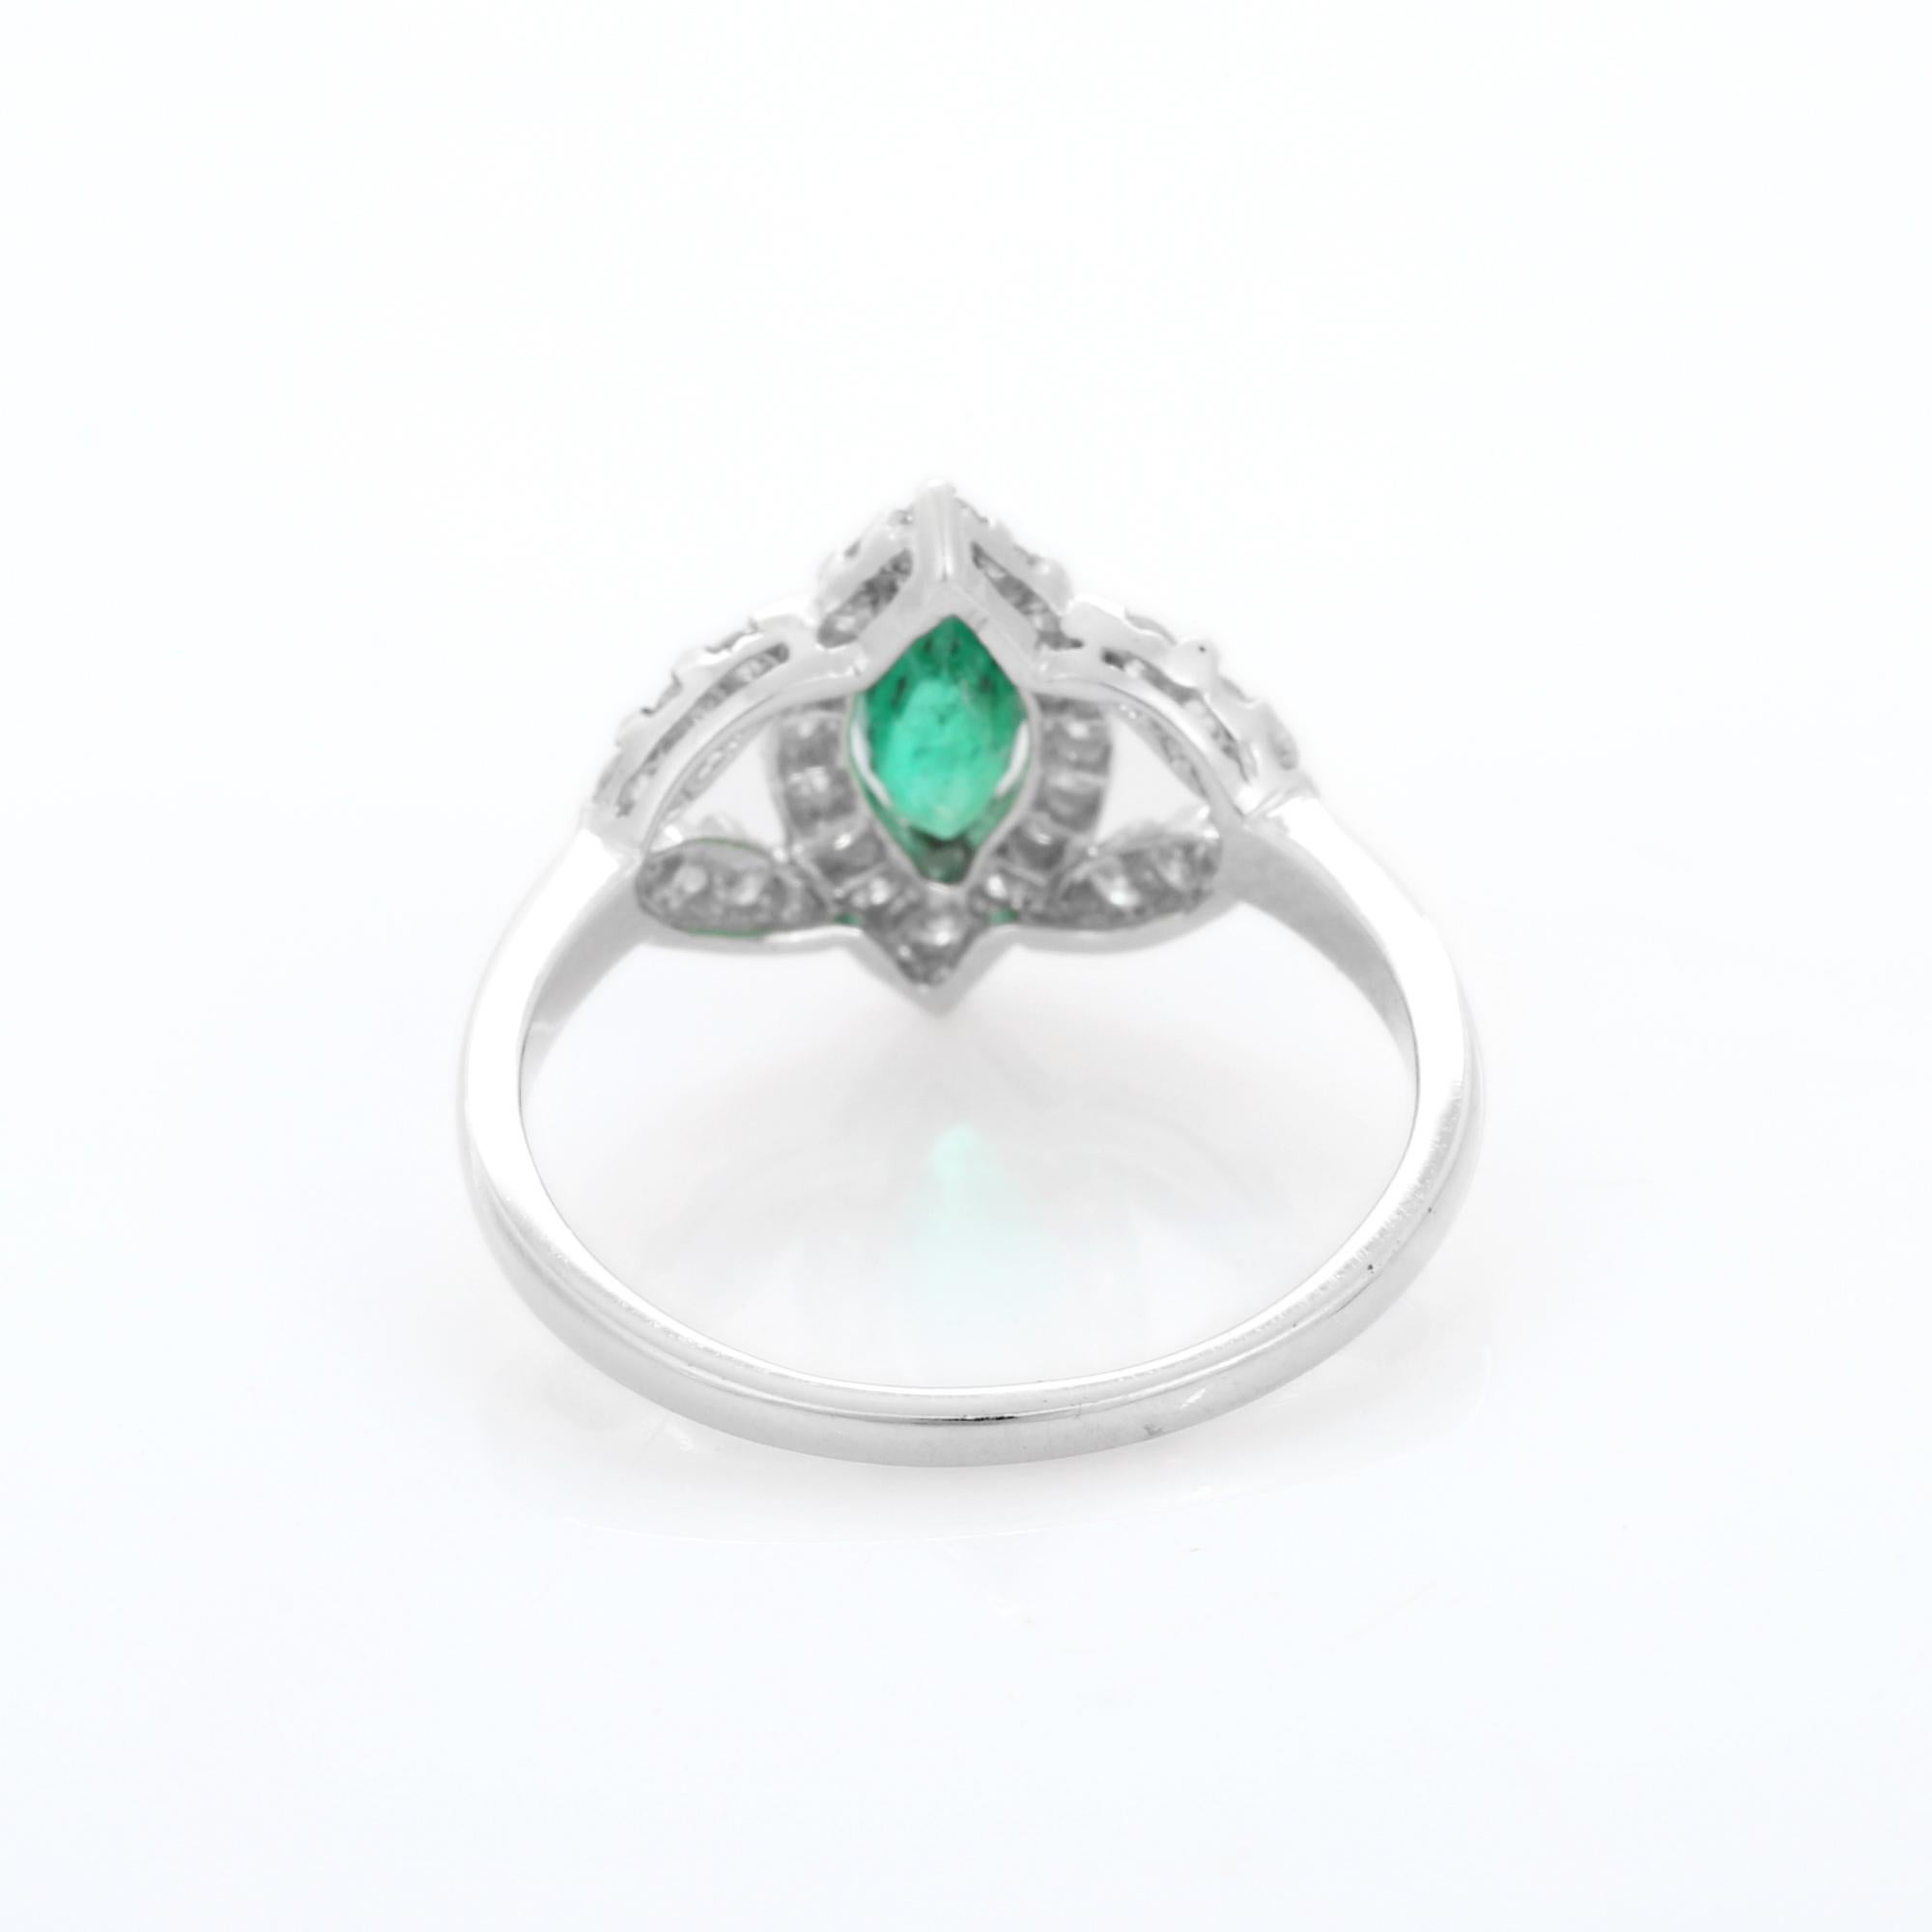 For Sale:  Natural Emerald Gemstone Wedding Ring with Diamonds in 18 Karat Solid White Gold 4